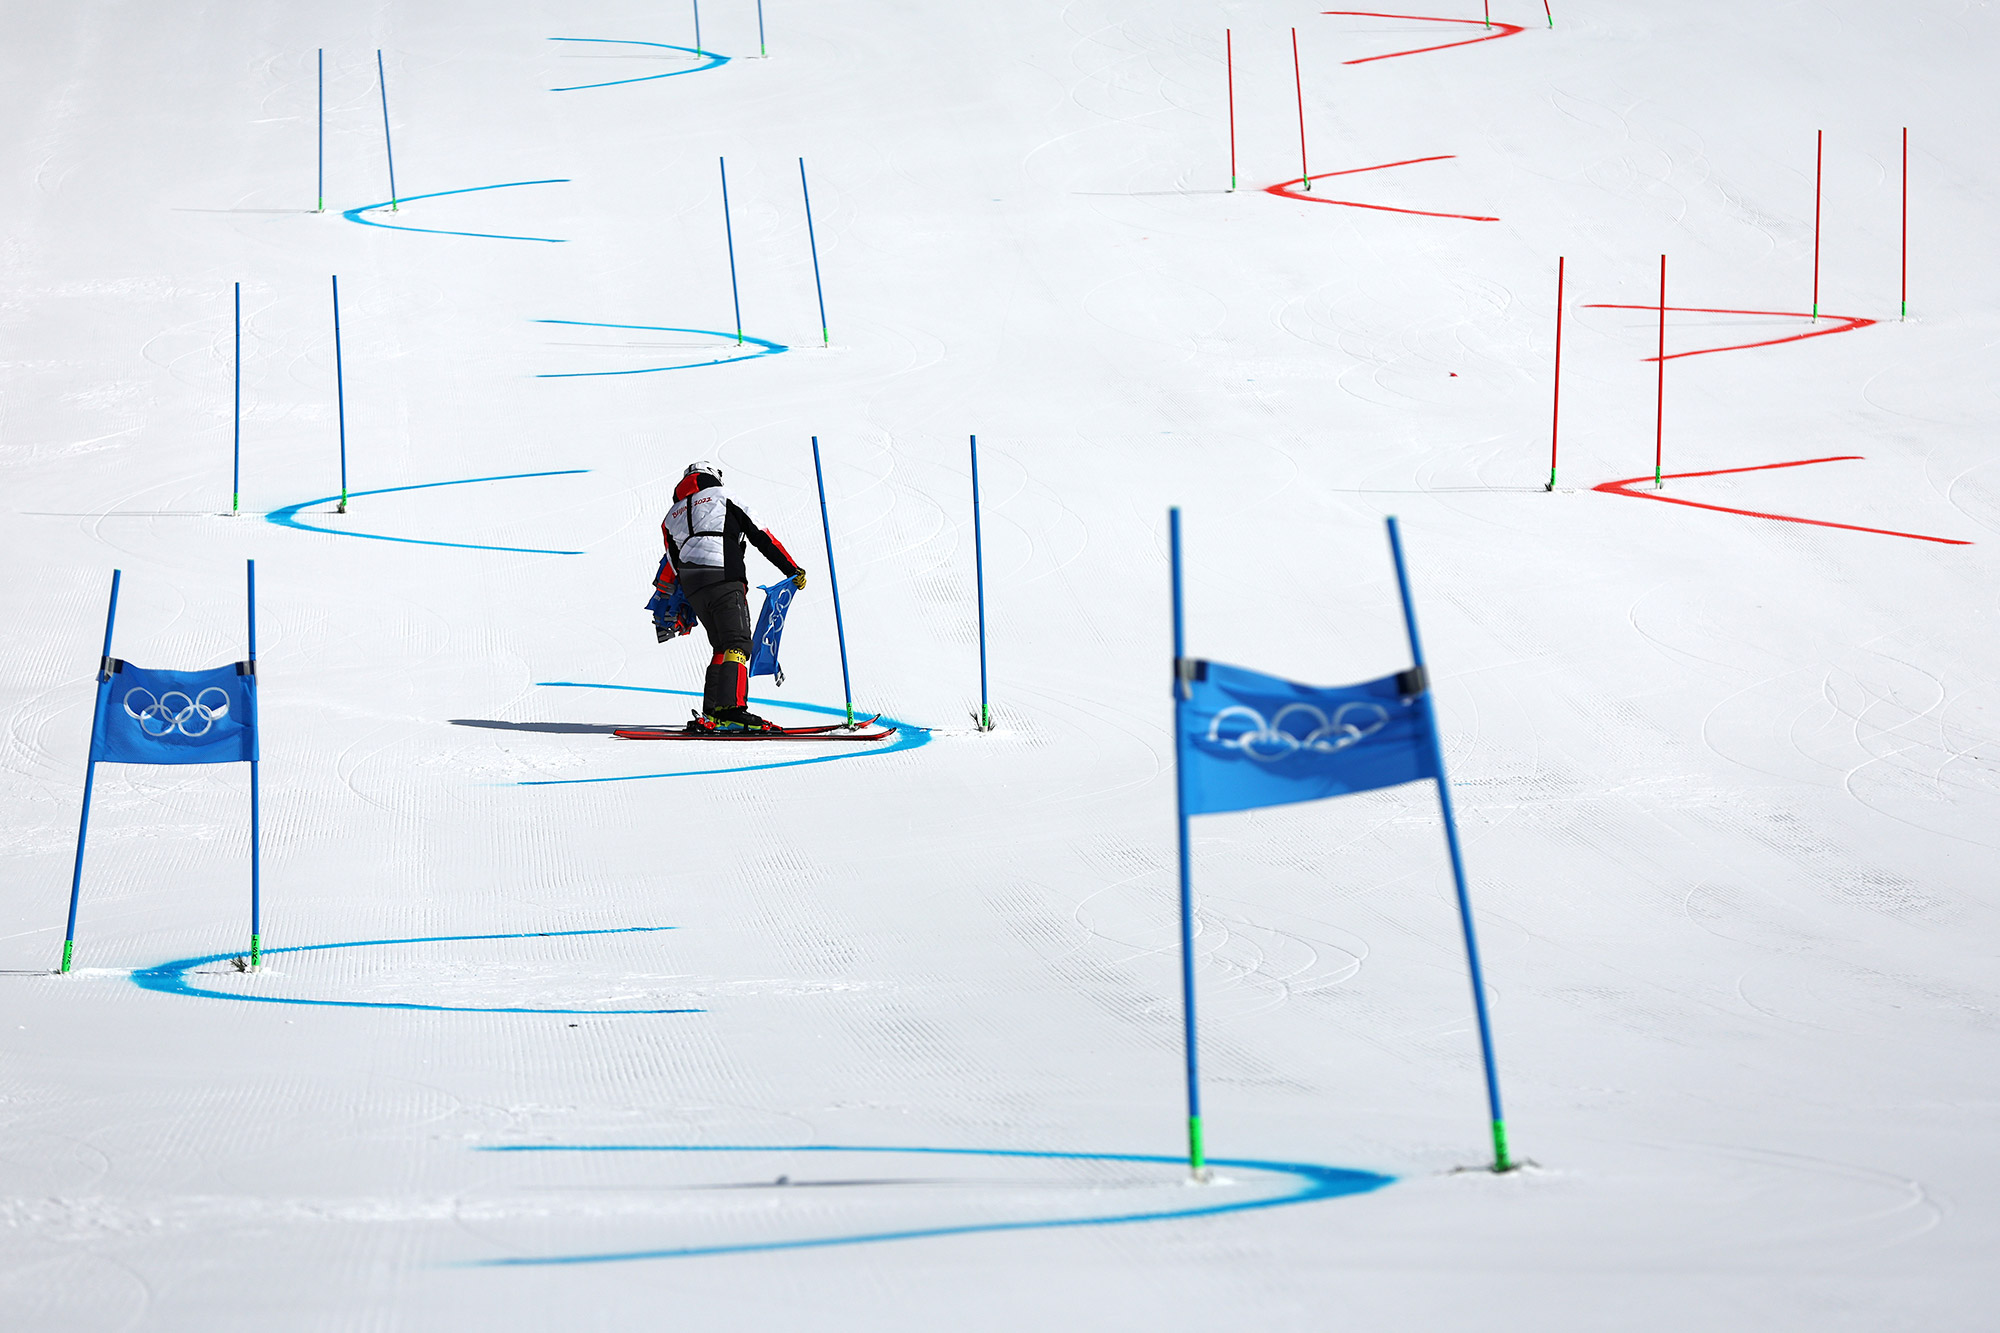 A course worker removes gate flags after the alpine skiing mixed team event was postponed due to poor weather conditions on Saturday.